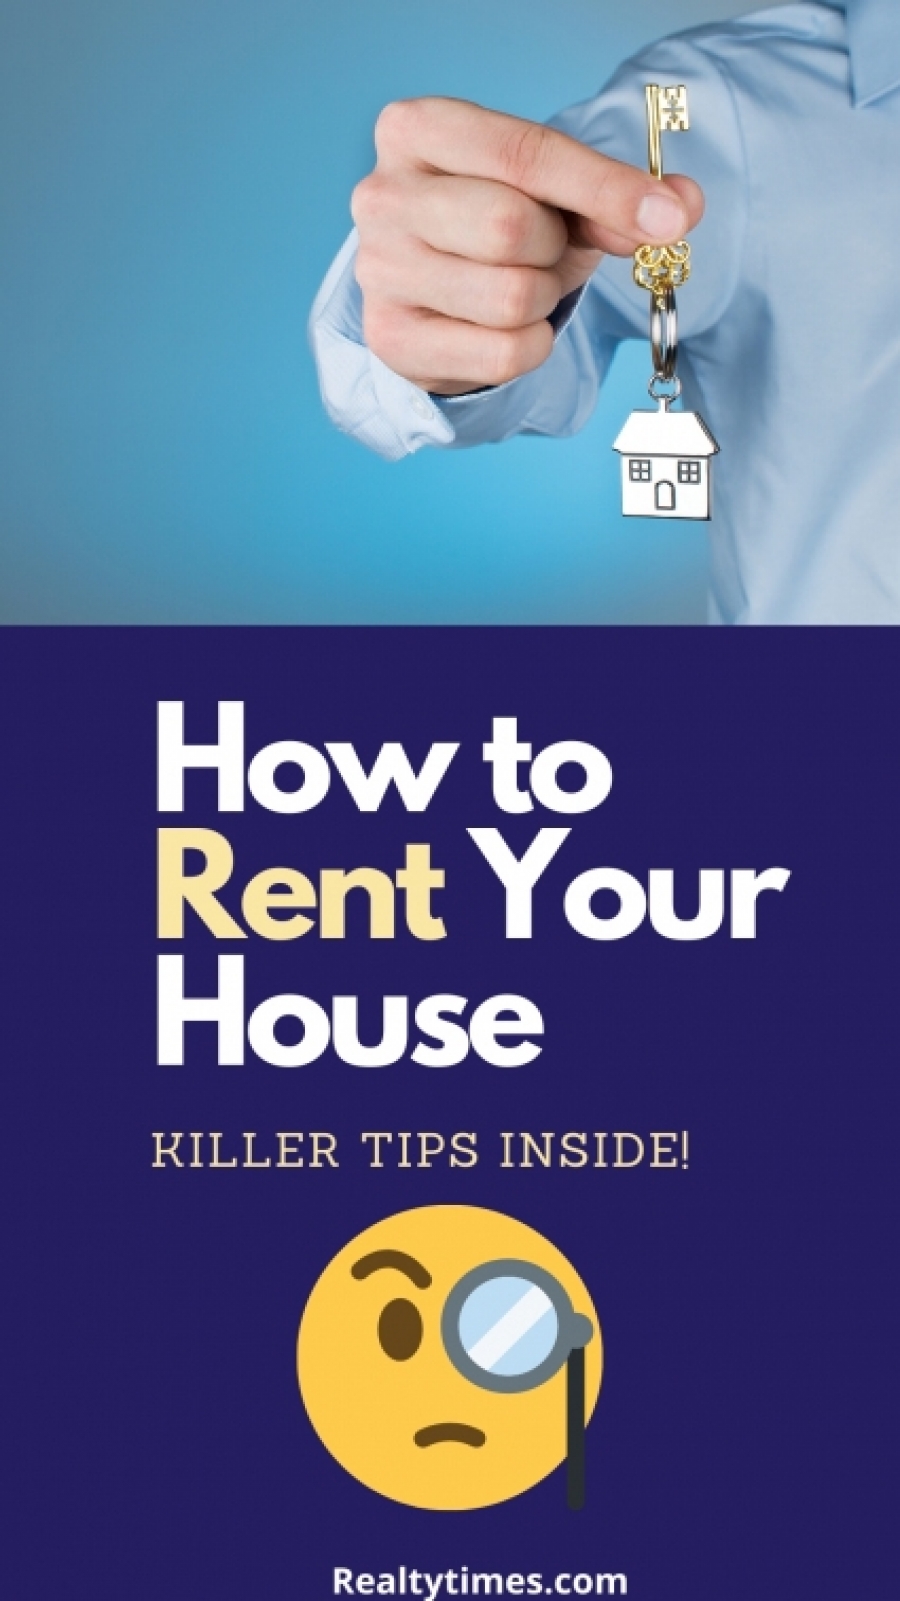 How to Rent Out Your Home